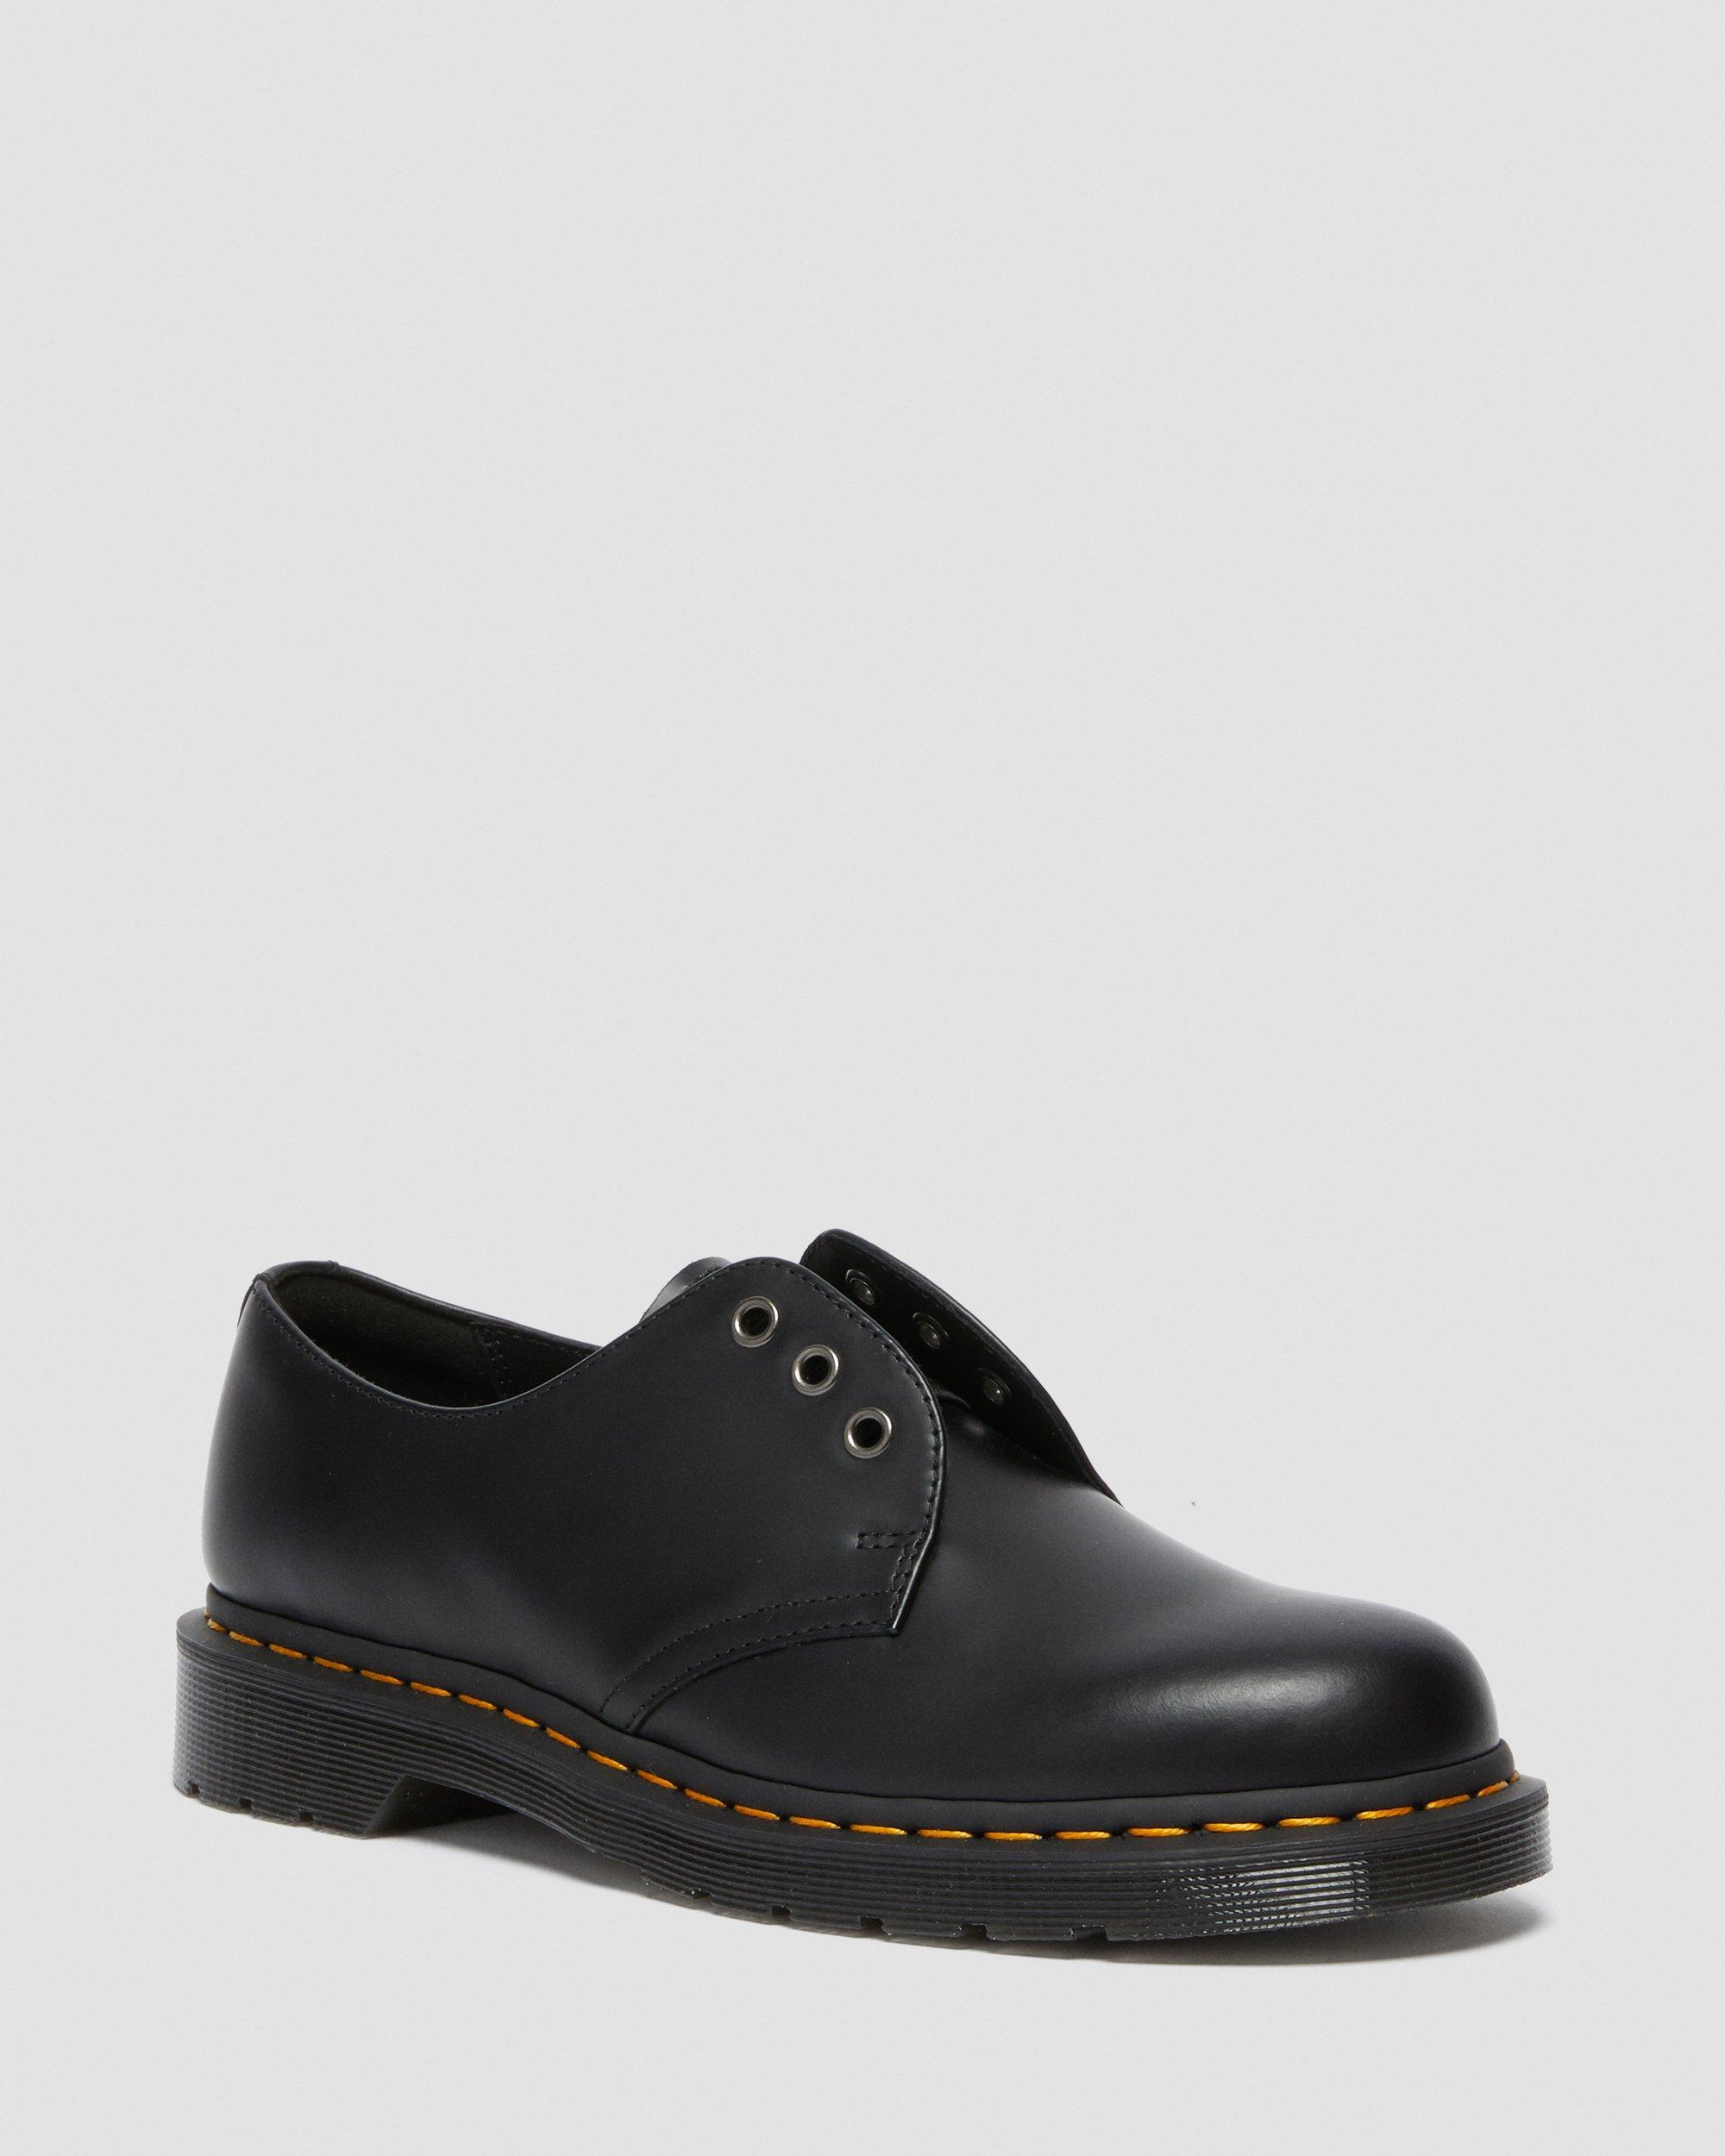 Dr. Martens 1461 Elastic Smooth Leather Oxford Shoes in Black | Lyst